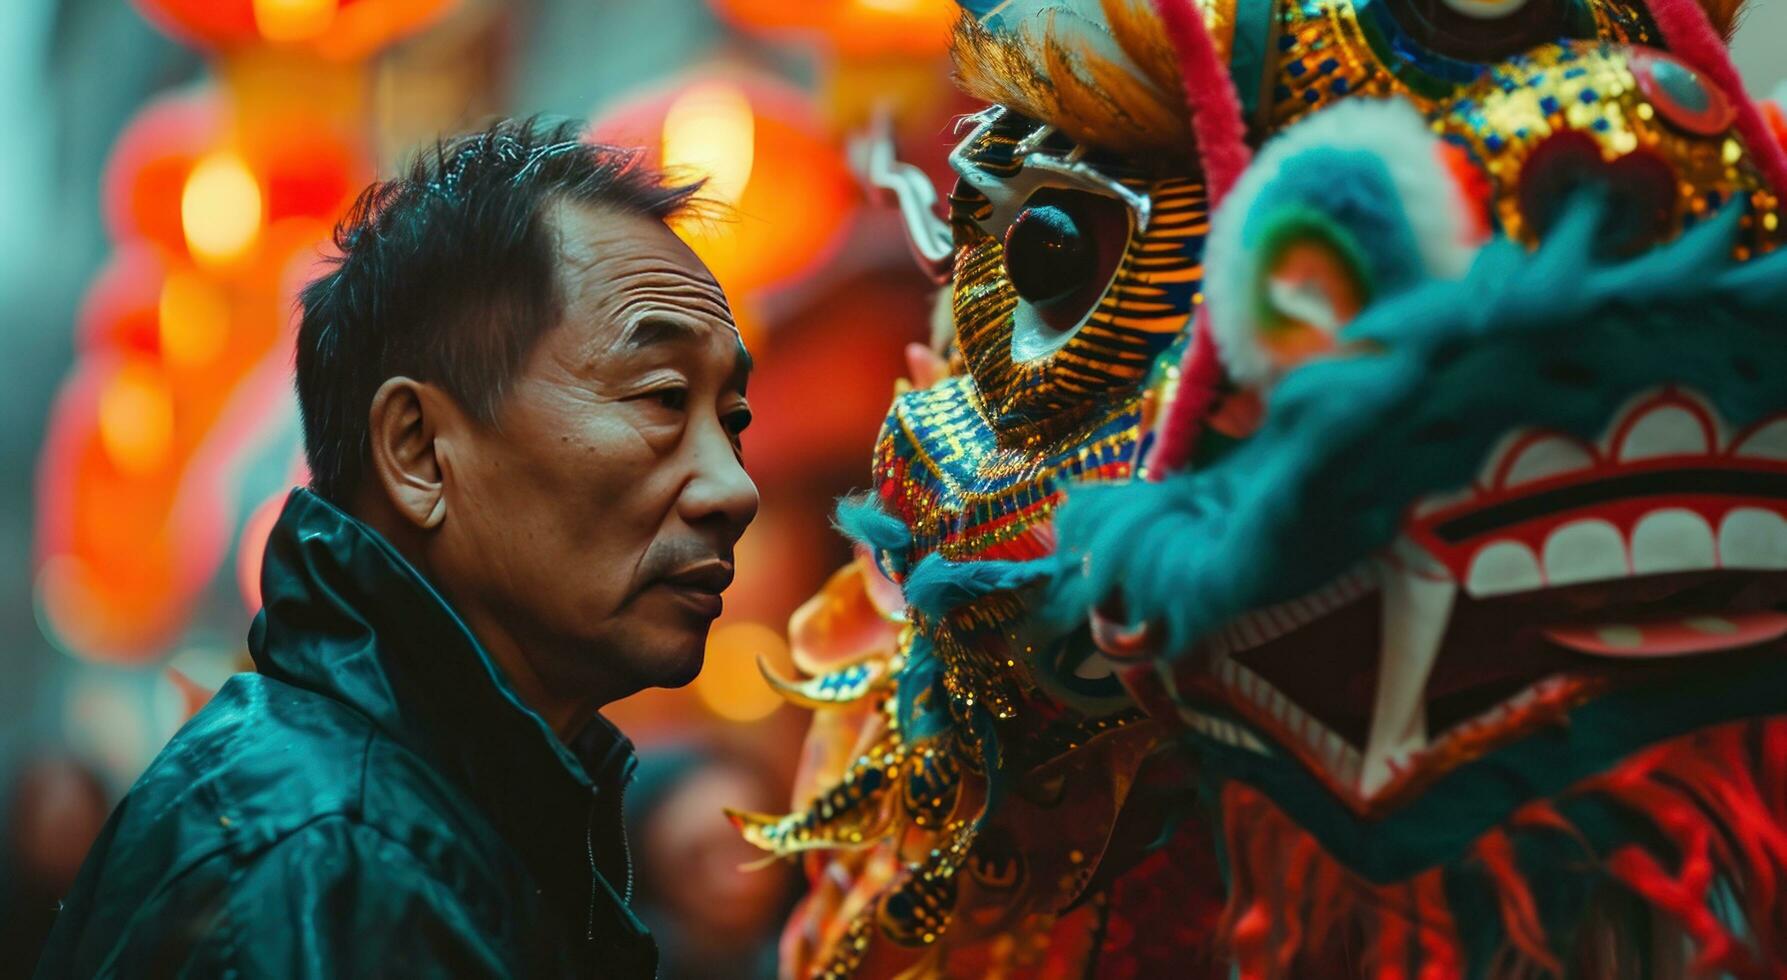 AI generated a man stands next to a colorful dragon to celebrate the new year photo